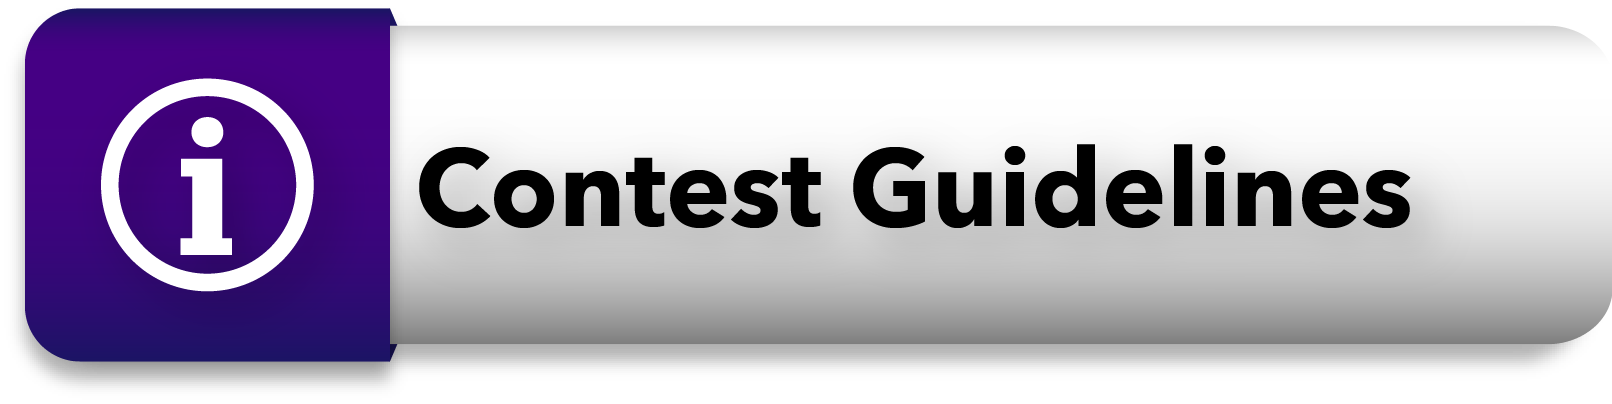 Contest Guidelines